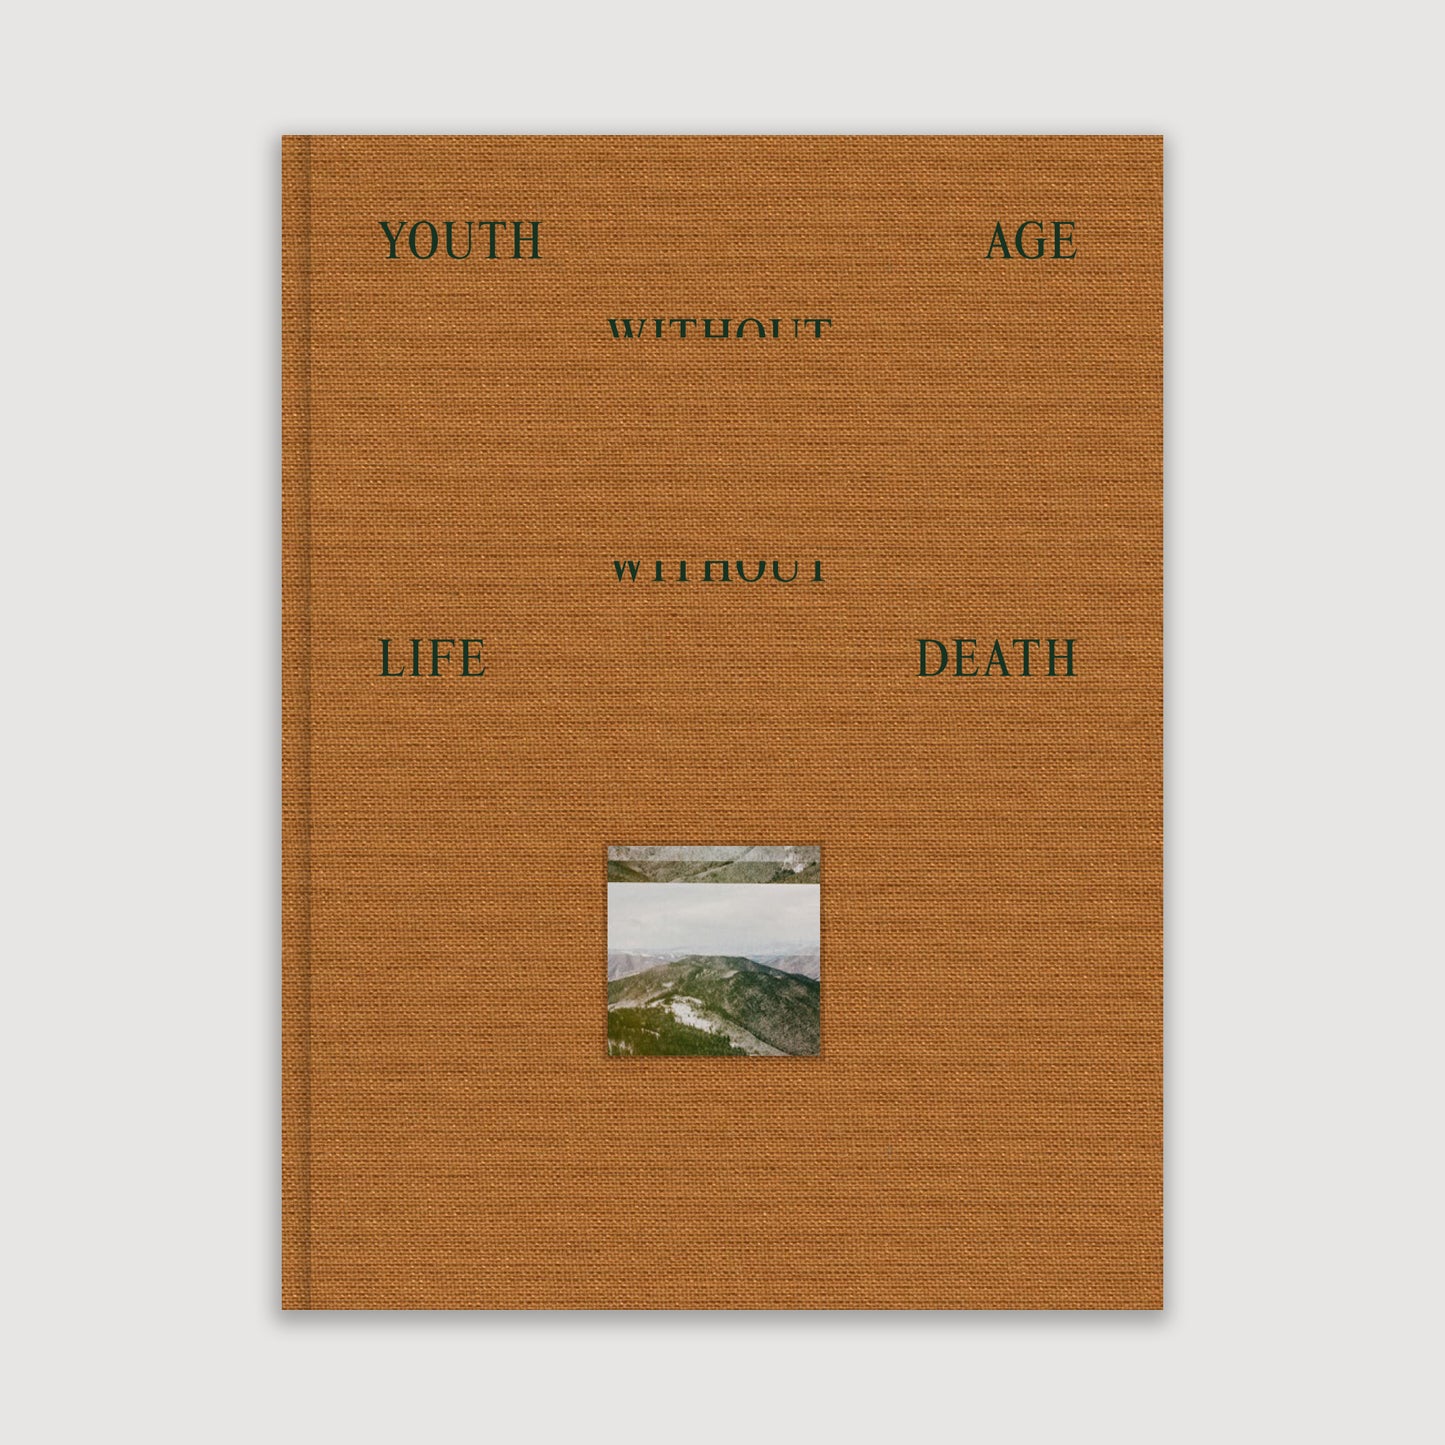 Youth Without Age and Life Without Death, Laura Pannack